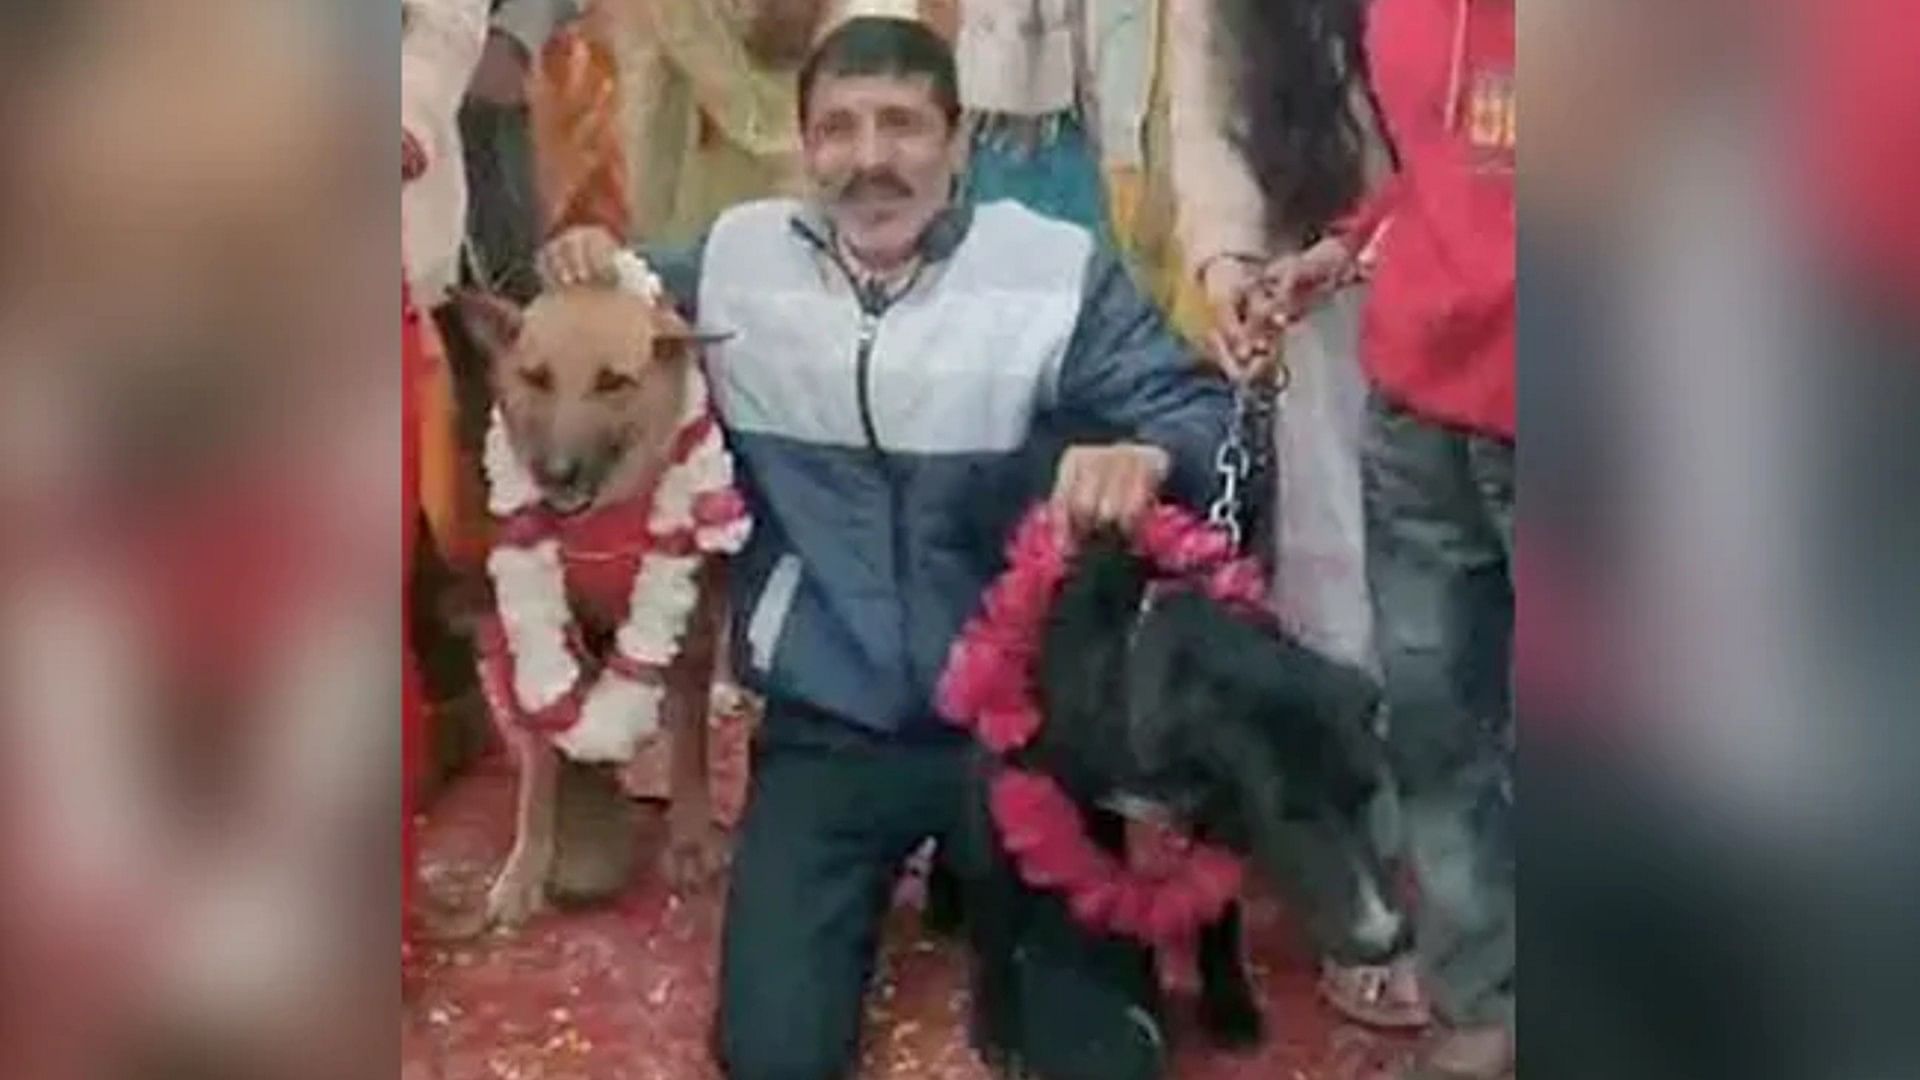 unique wedding dog tommy and jelly married in aligarh uttar pradesh Video Viral